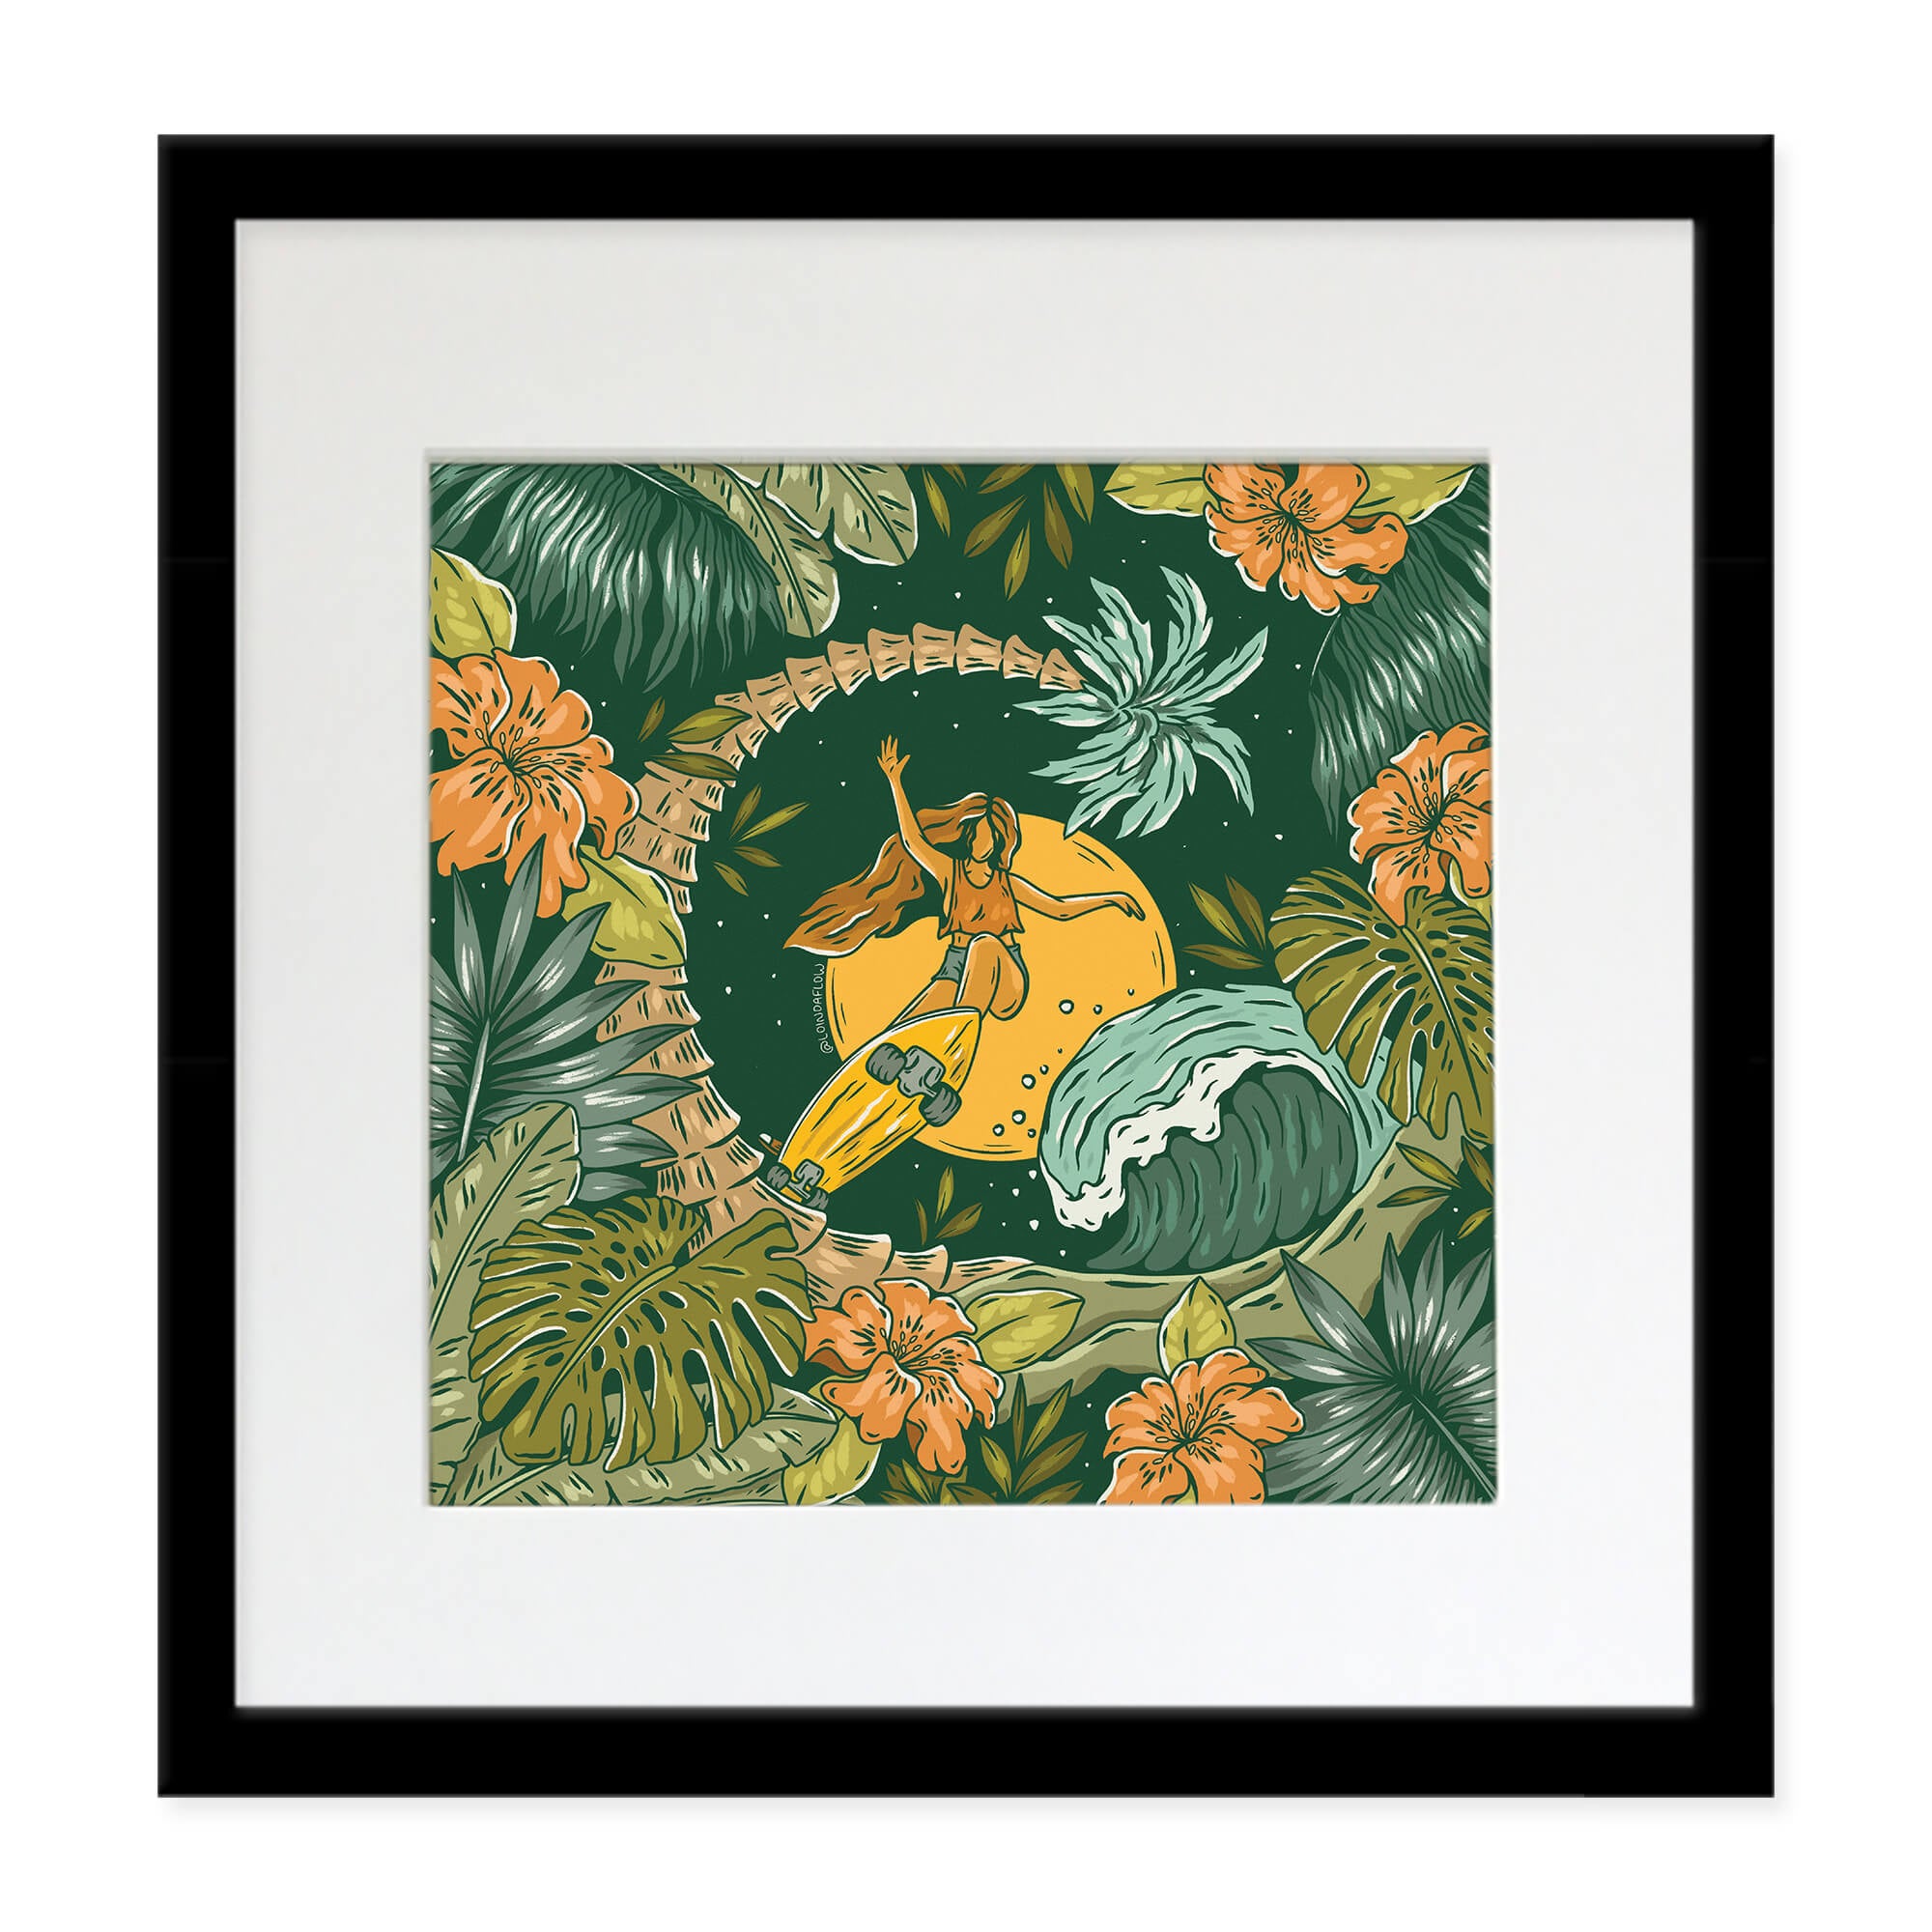 A matted art print with black frame featuring a girl staking with flowers around by hawaii artist Laihha Organna